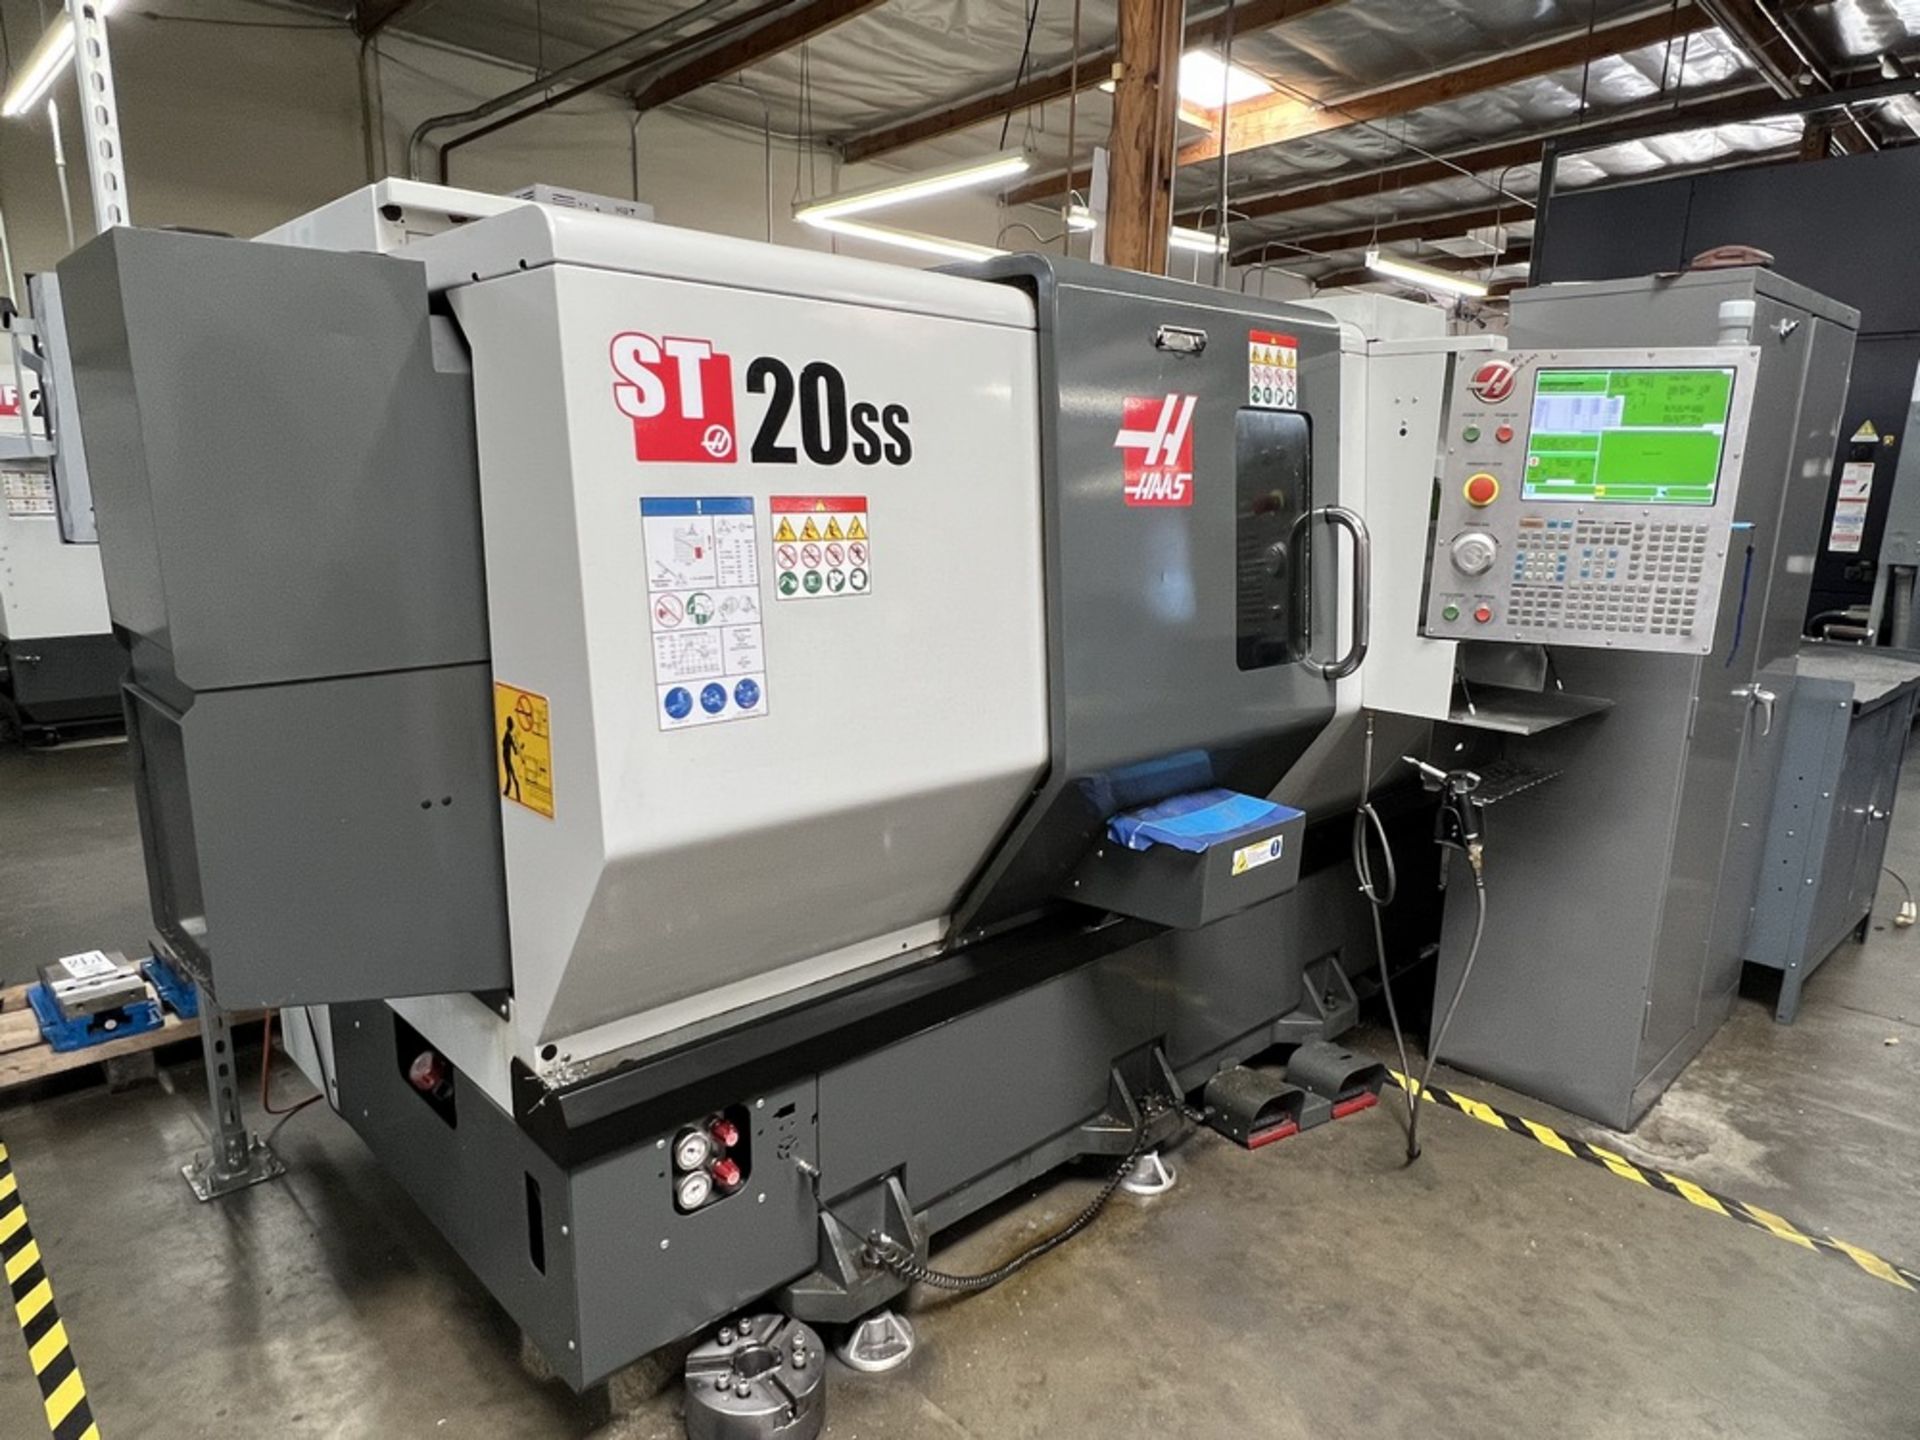 2017 Haas ST-20SS CNC Lathe, 12 Station, Tailstock, Toolpresetter, Royal 5C Collet Chuck with 8" LMC